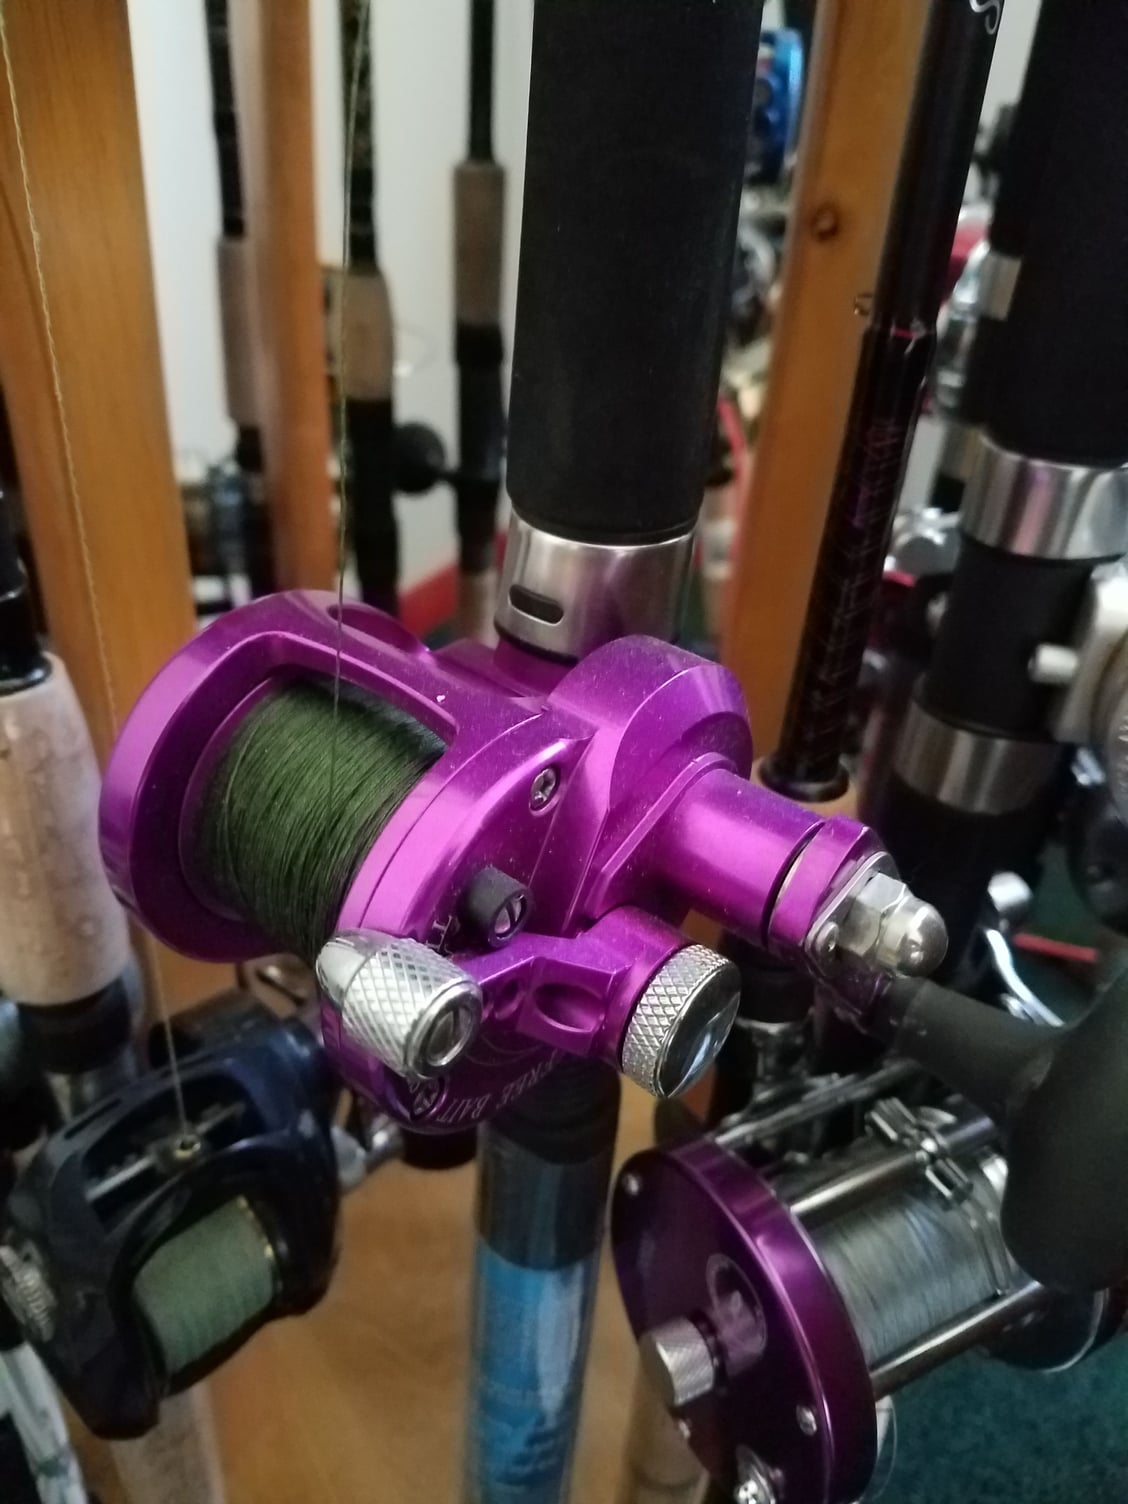 Avet sx 5.3 reels for sale - The Hull Truth - Boating and Fishing Forum